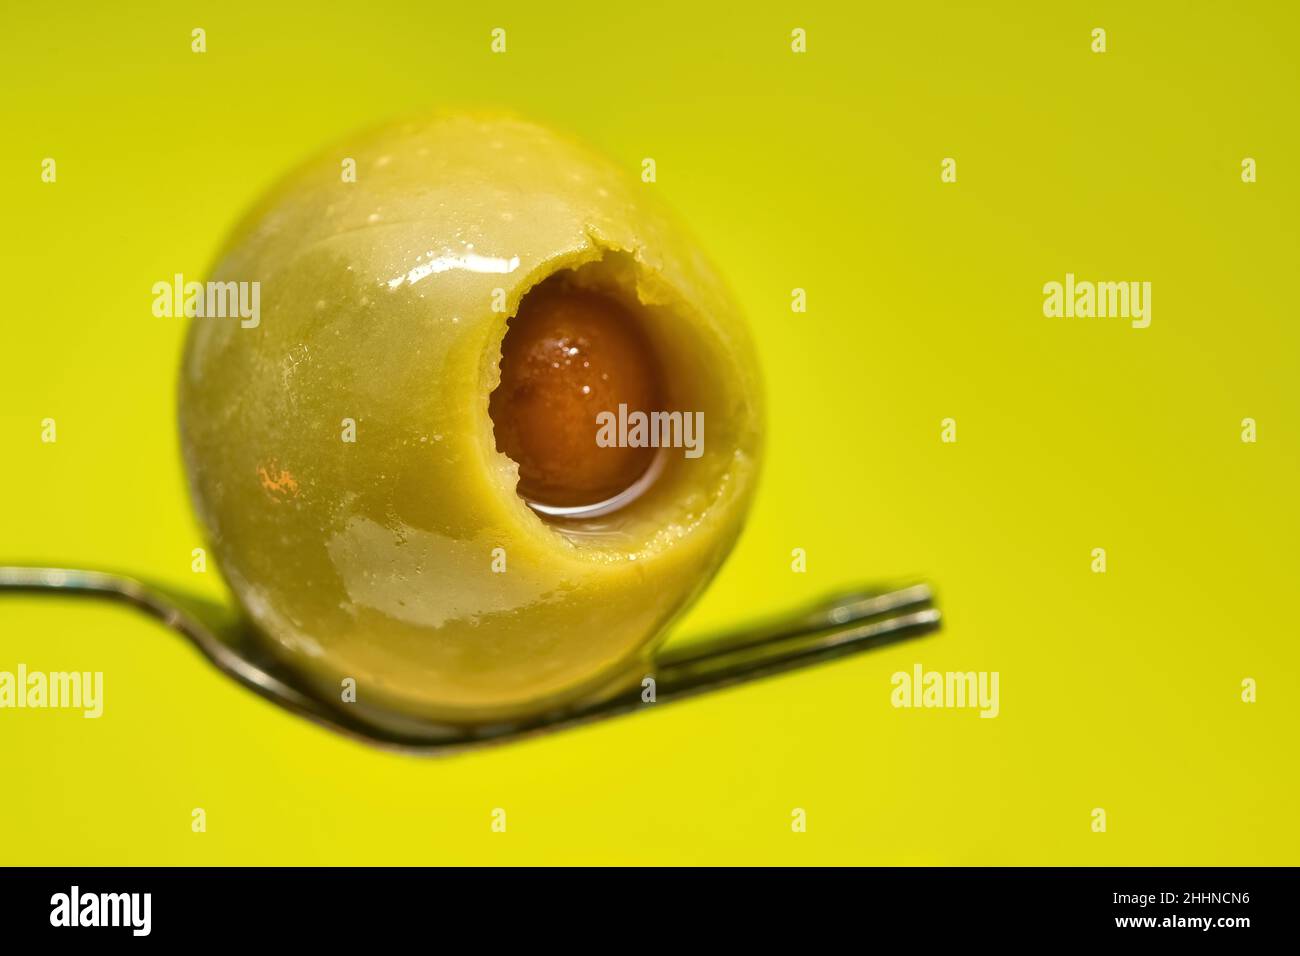 Stuffed olive over a small fork, macro photography Stock Photo